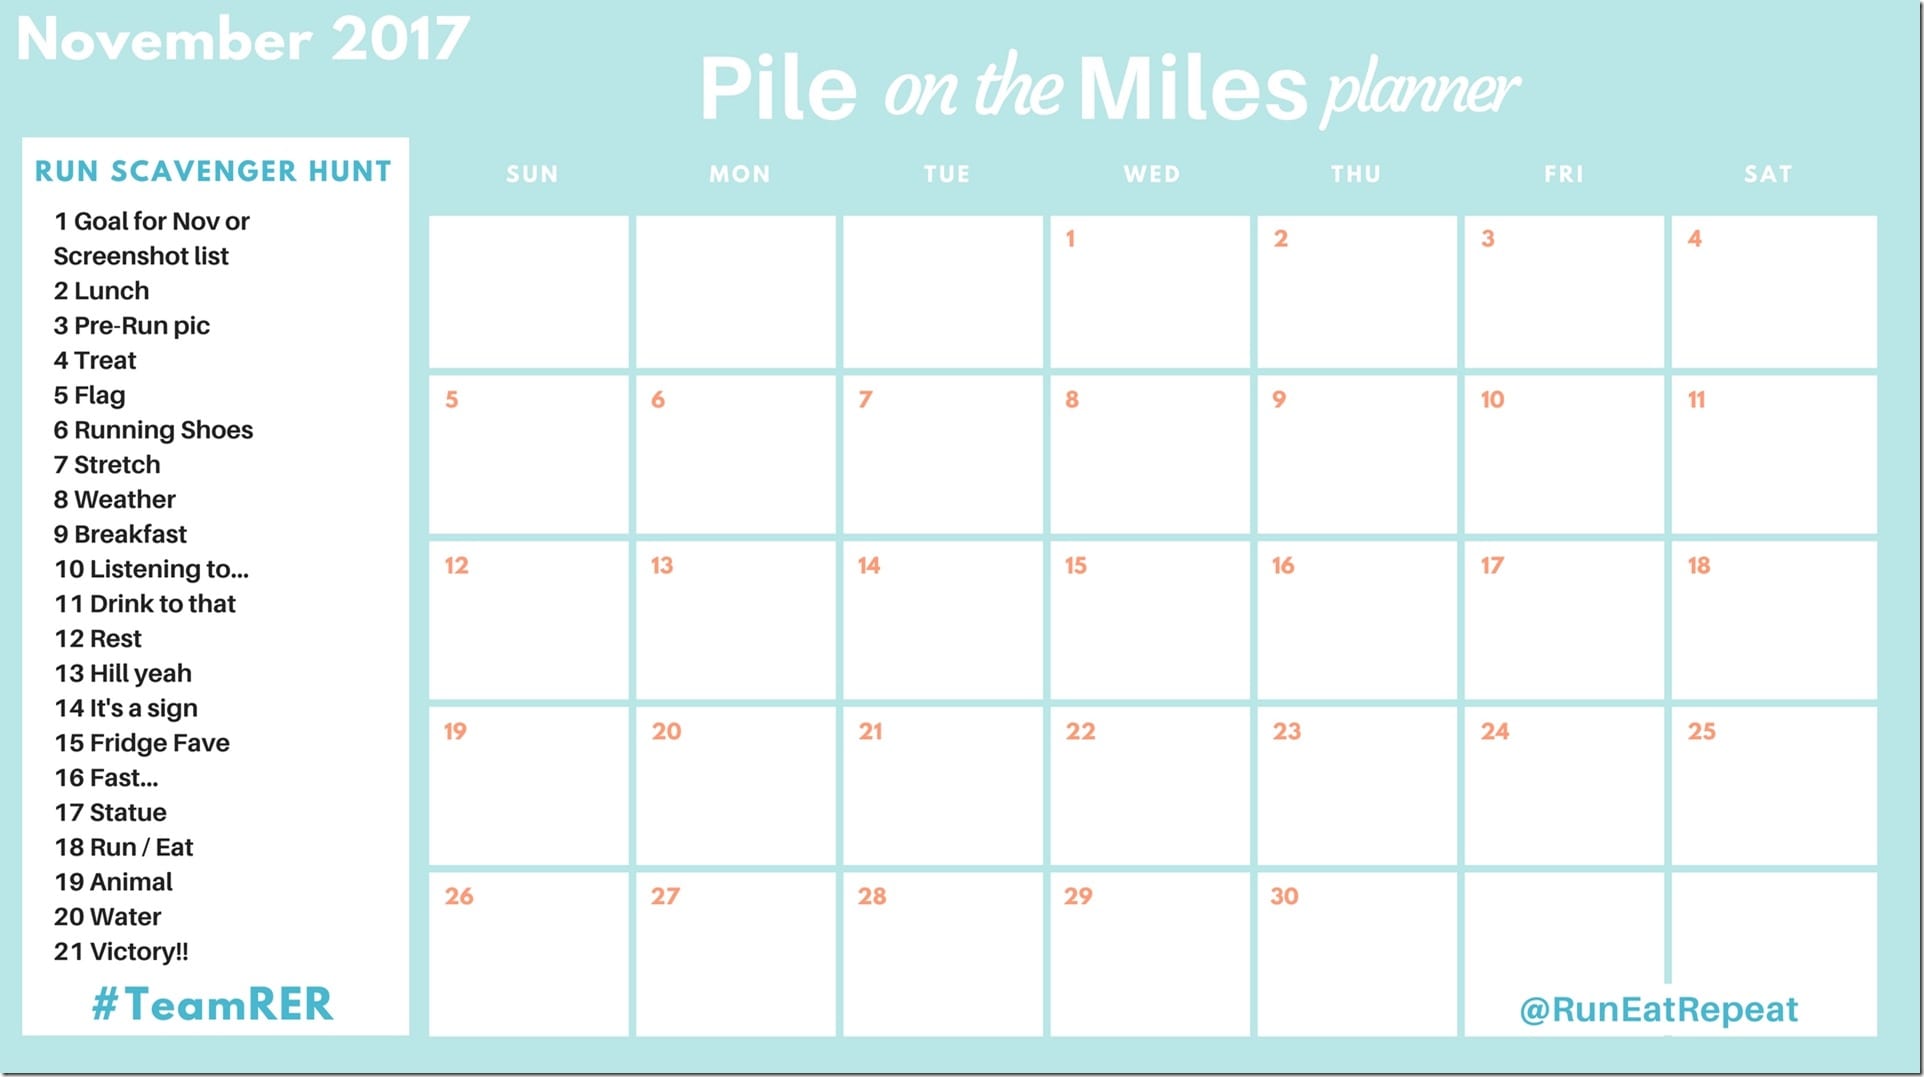 Pile on the Miles planner